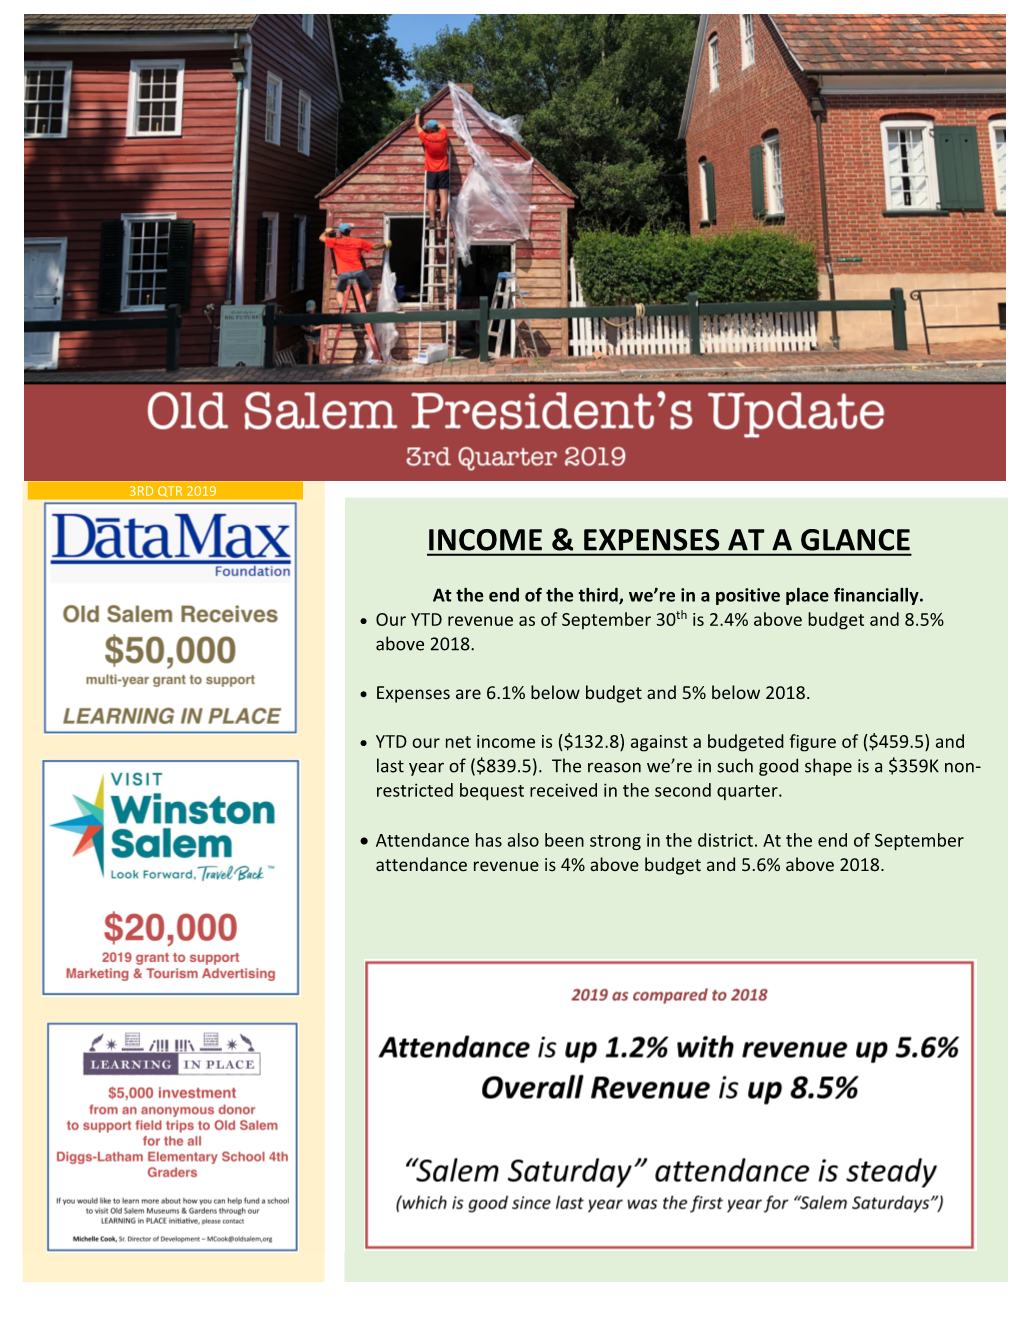 Income & Expenses at a Glance